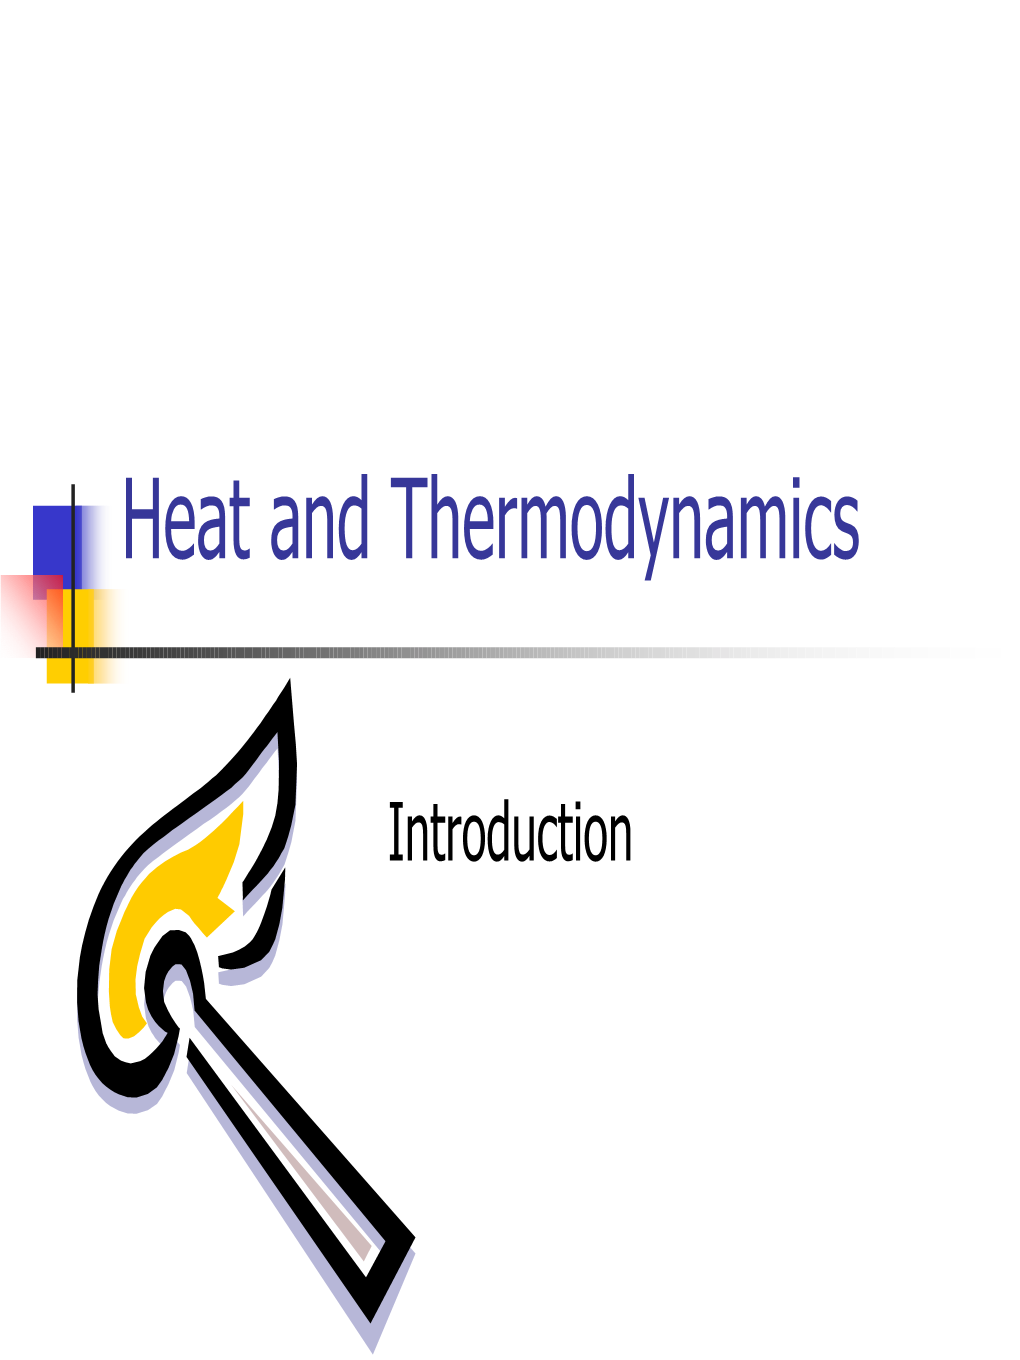 Heat and Thermodynamics Course